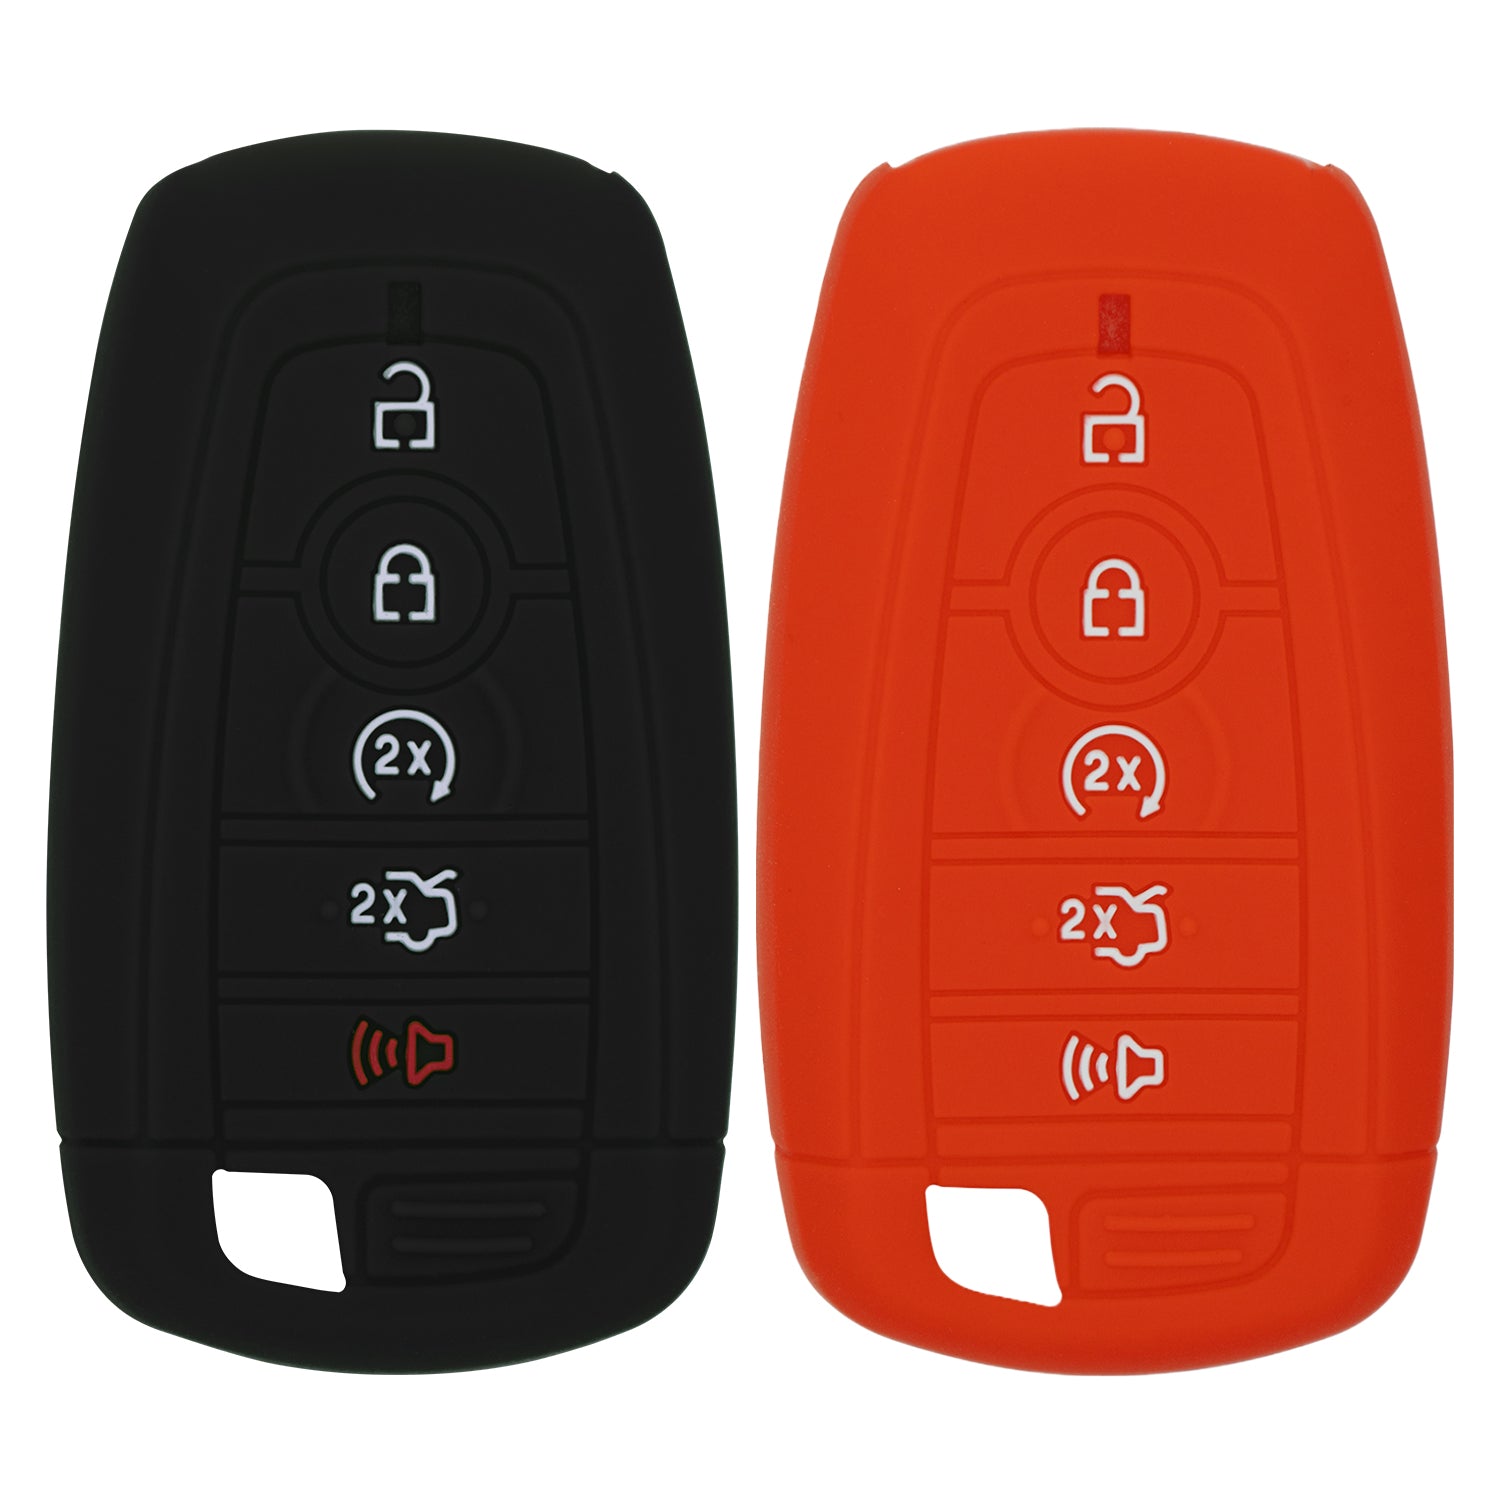 Silicone Case for Smart Key Remote Keyless Entry for Ford Fusion Explorer Edge Mustang Expedition M3N-A2C93142600 164-R8149 164R8149 R8149 (Black & Red)